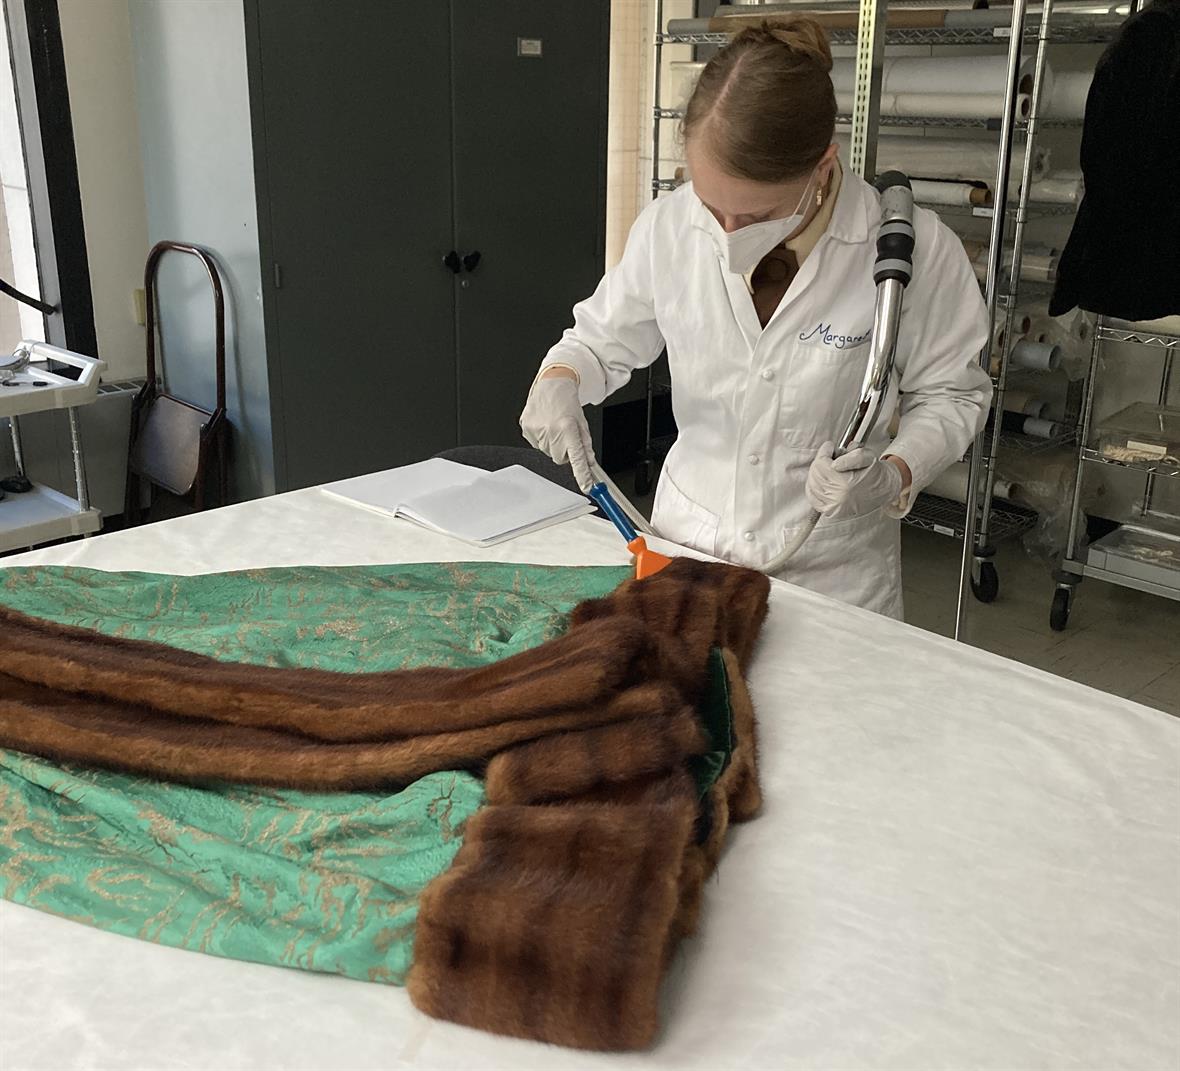 A student, wearing a lab coat and a mask, uses a hand-held vacuum to clean the fur trim on a textile.